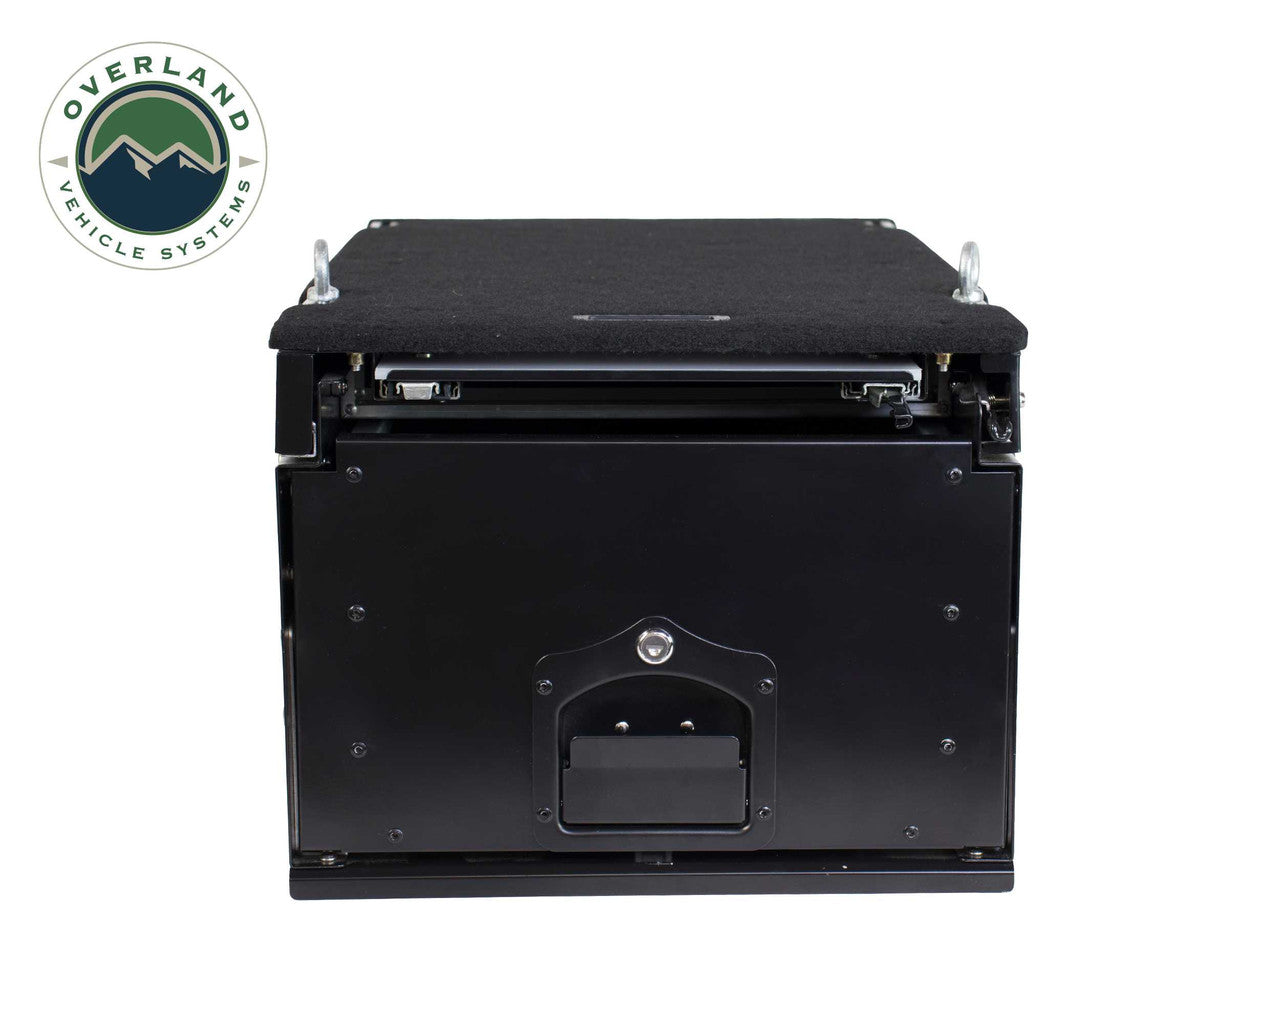 OVS Universal Cargo Box With Slide Out Drawer & Working Station Size Black Powder Coat 21010201